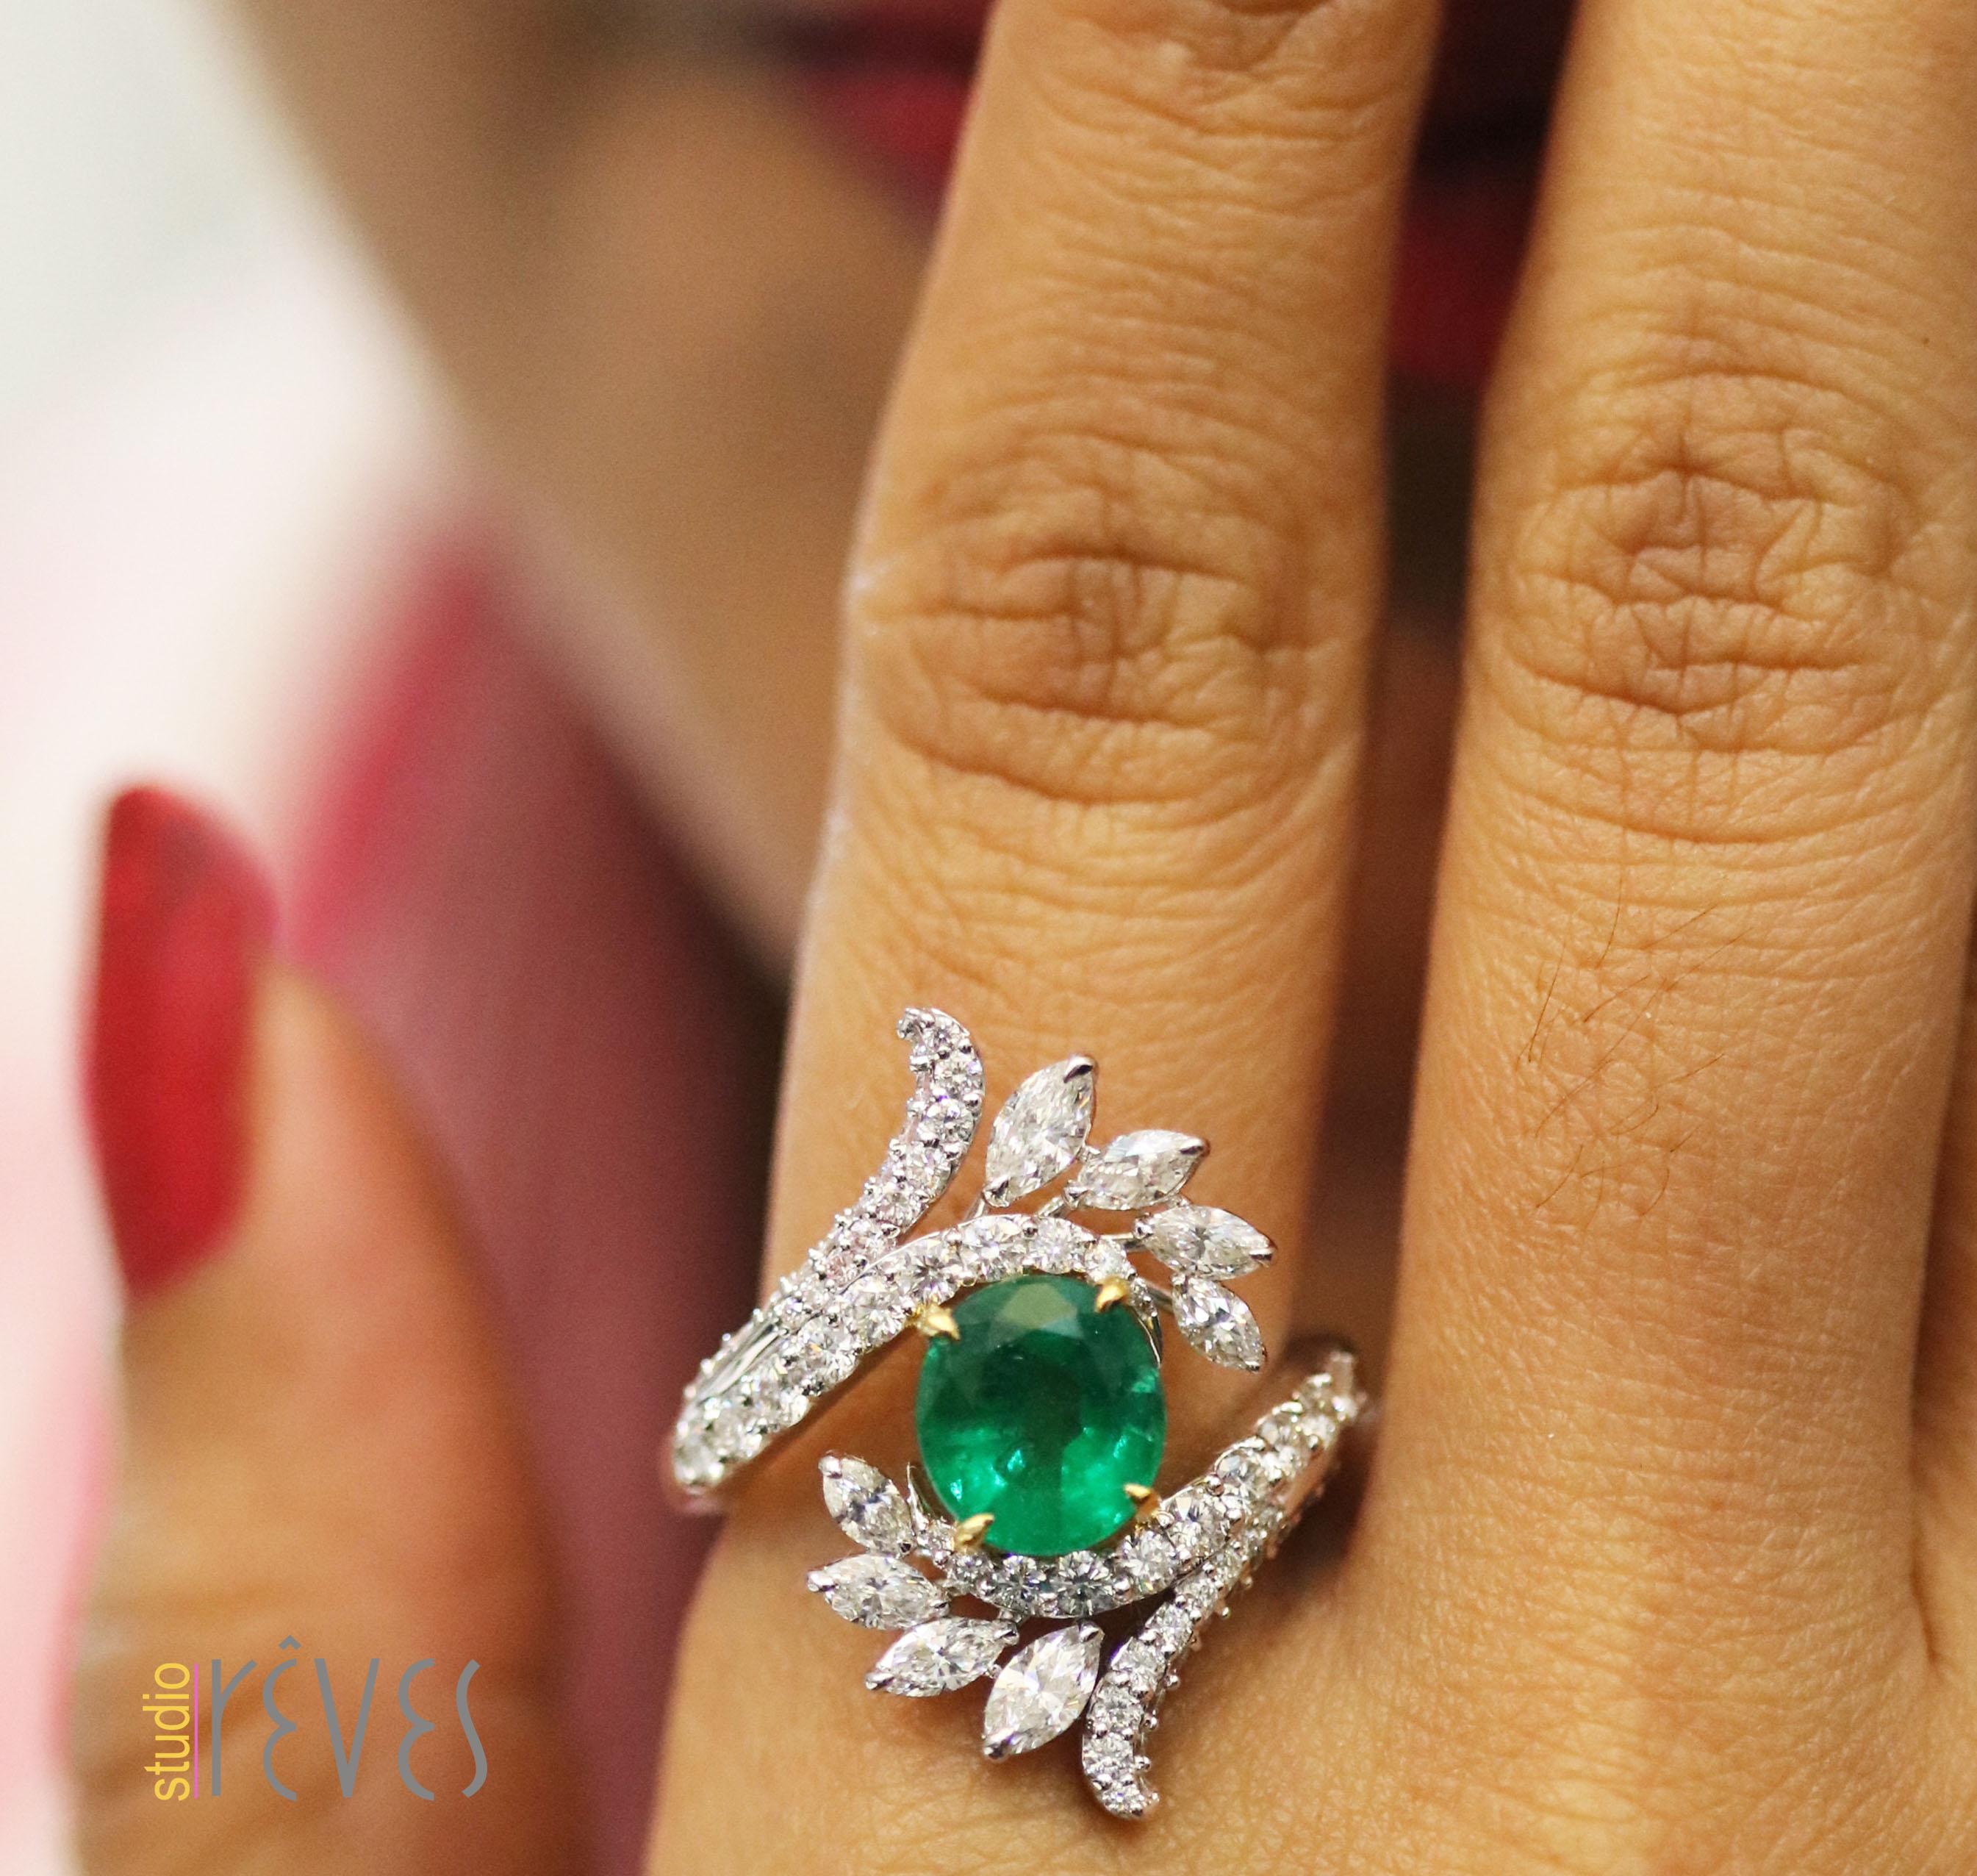 Gross Weight: 7.38 Grams
Diamond Weight: 1.54 cts
Emerald Weight: 1.77 cts
Ring Size: US 5.75 (Resizing can be done)
IGI Certified:  Summary No: 22J9755818 

Video of the product can be shared upon request.

Make a scintillating statement with this